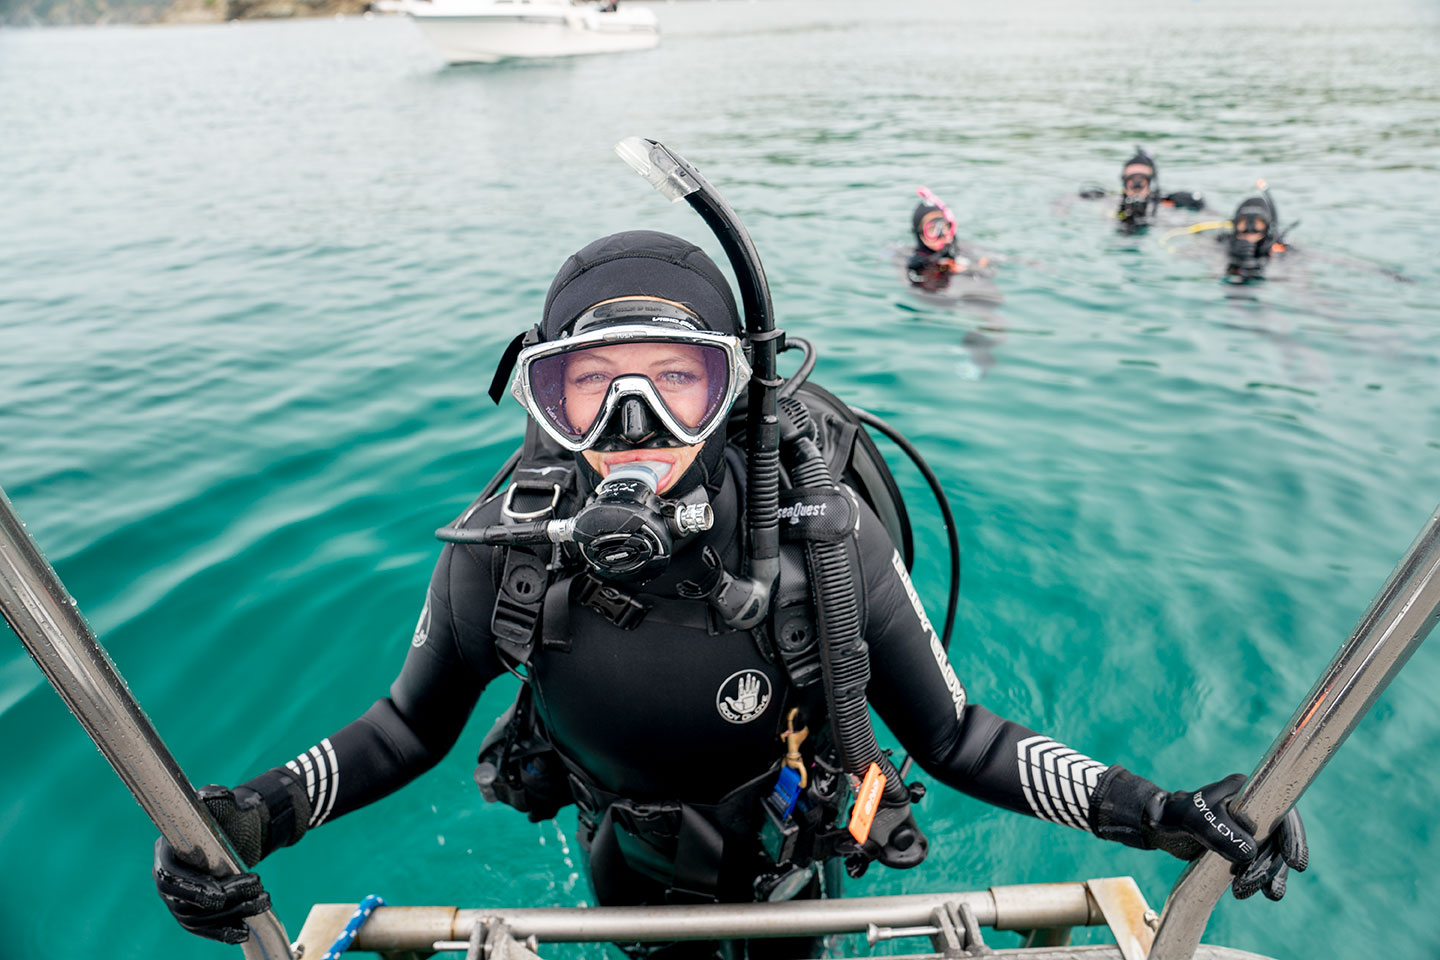 A diver exiting the water wearing a scuba mask, which is specifically designed for scuba diving